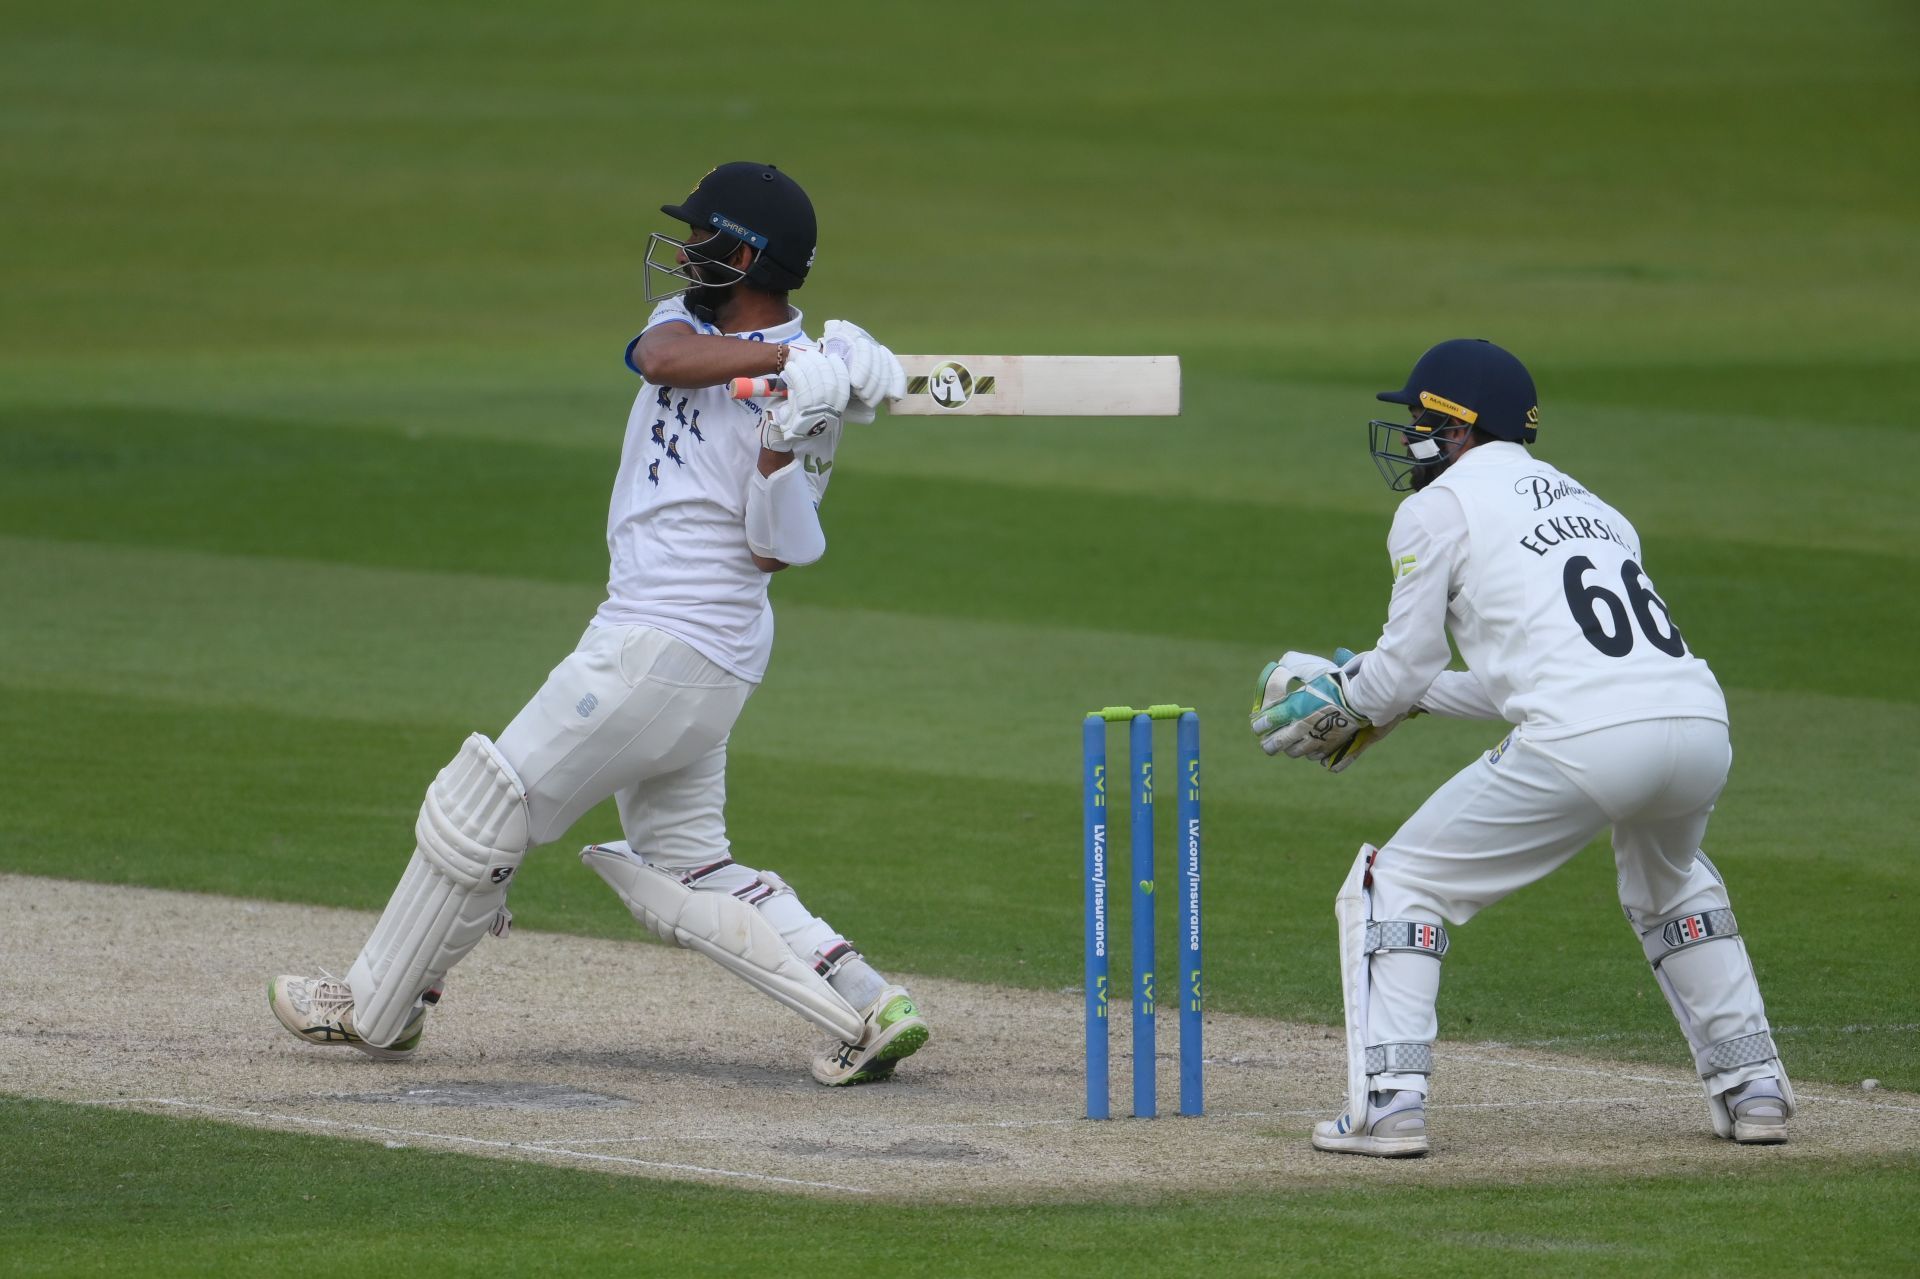 Pujara in action during the match between Sussex and Durham